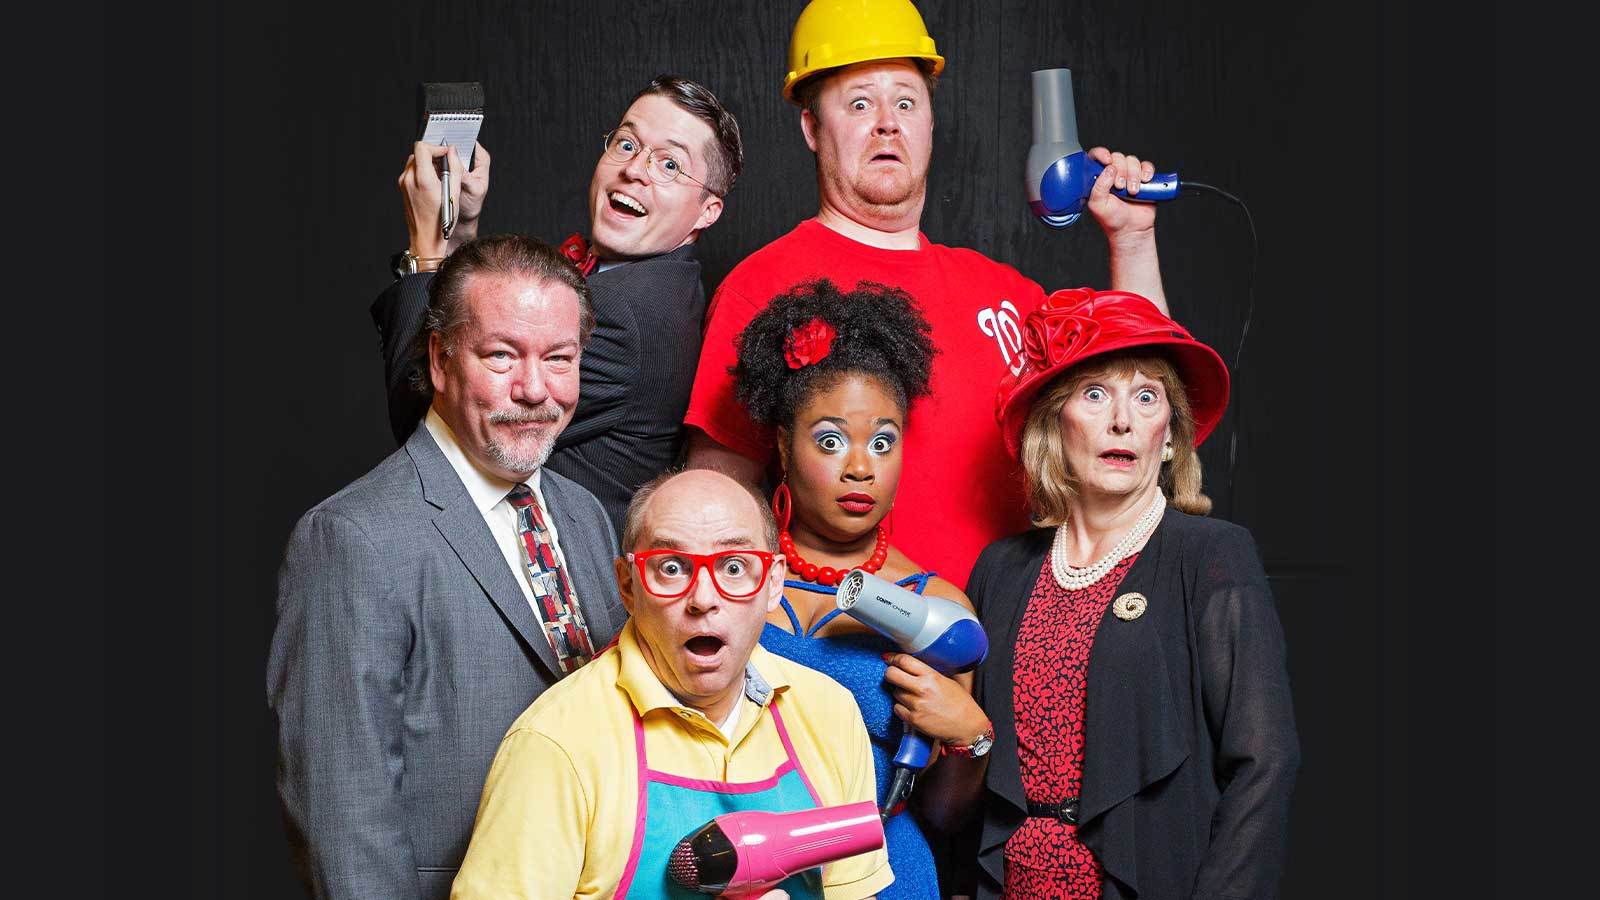 The six member cast of Shear Madness looks at the camera with funny expressions on their faces in character. Four are surprised, one is smirking, and one is eagerly smiling.